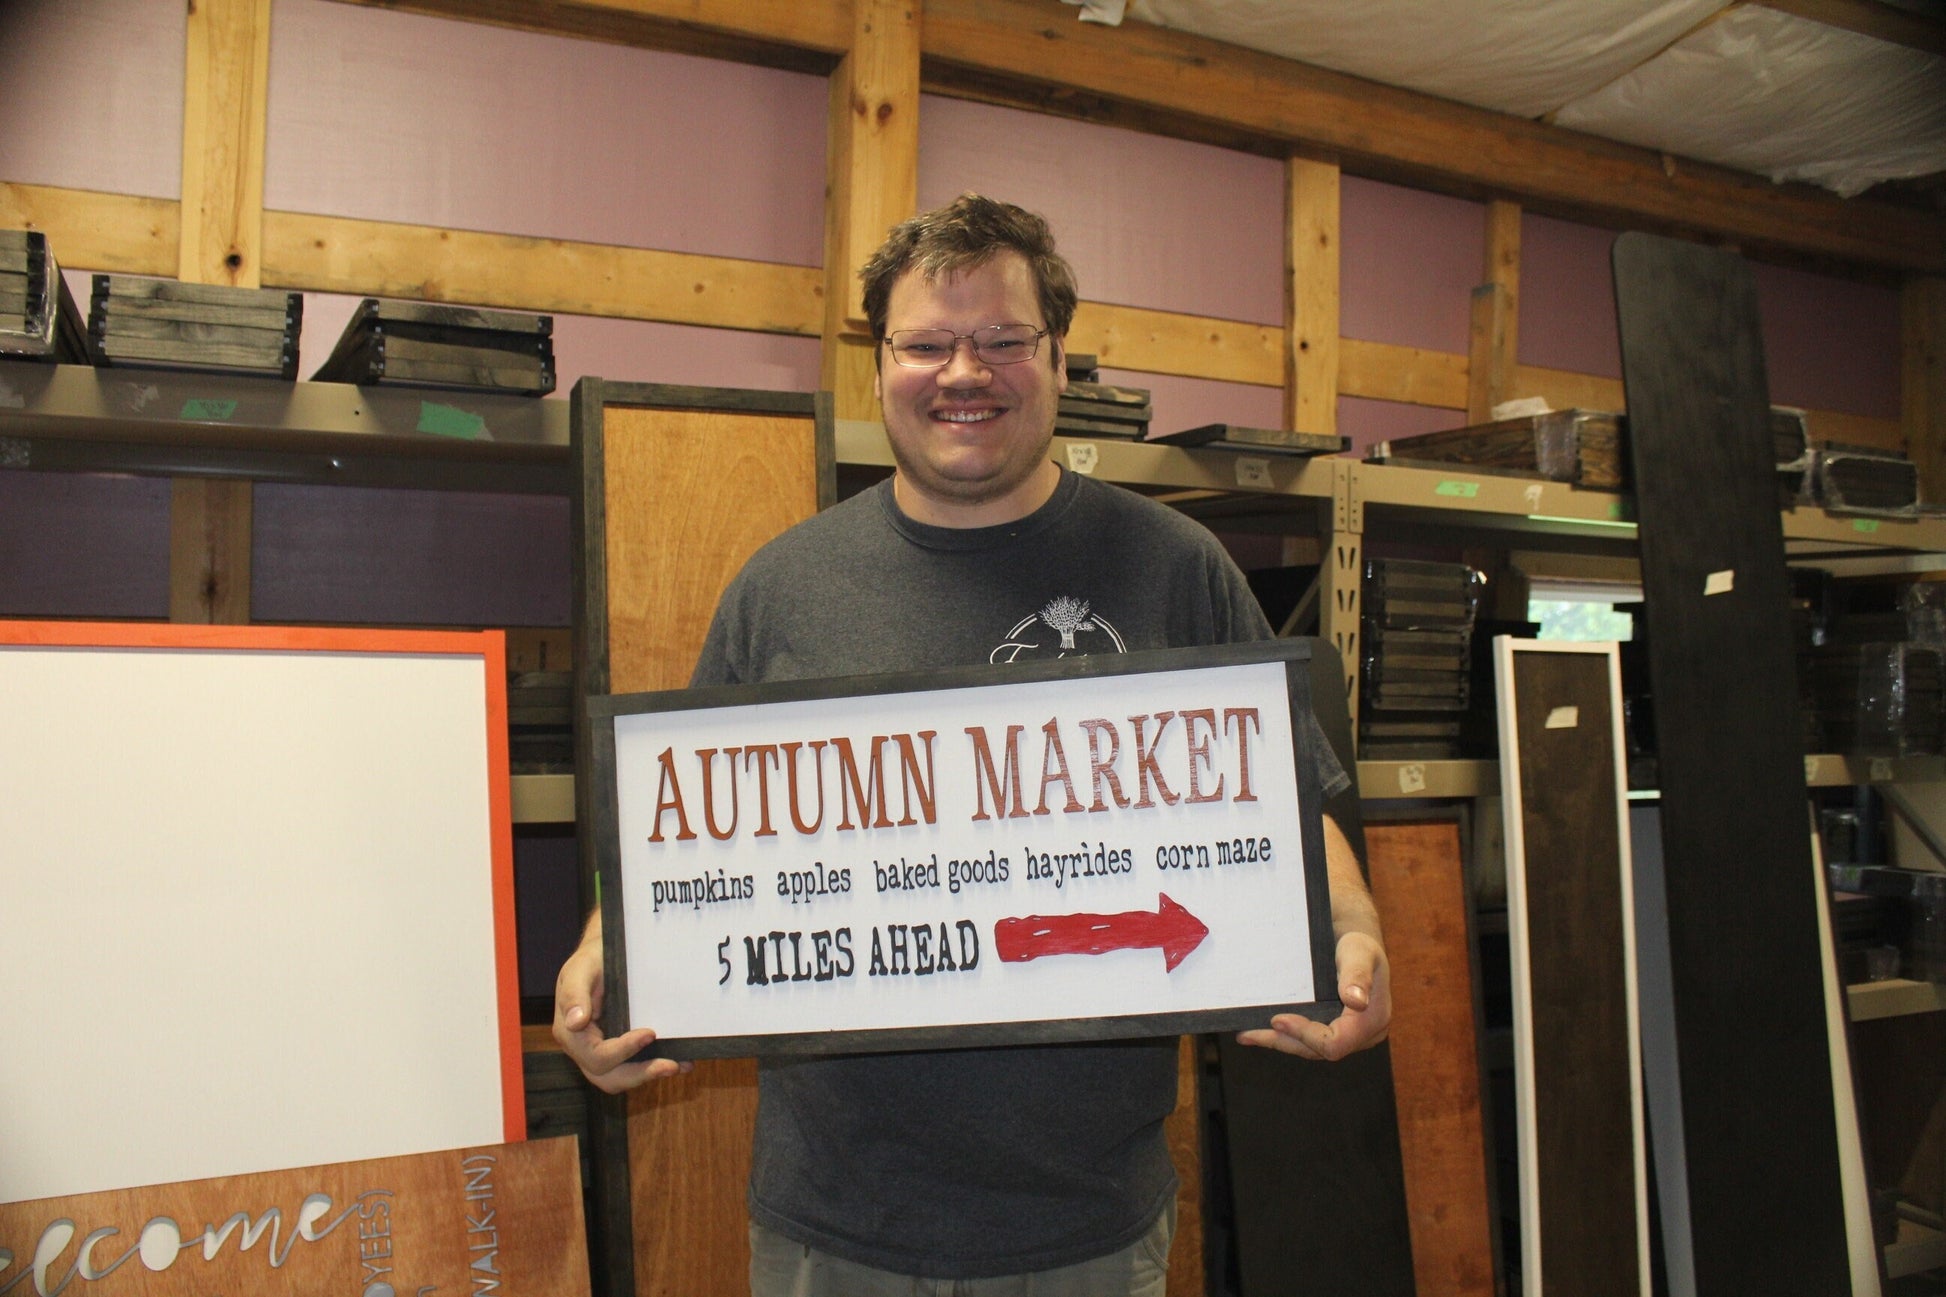 Autumn Market Fall Decoration Destination Sign Entrance Raised Text Rustic Wood Country Grocery Store Advertisement Distance Arrow Market